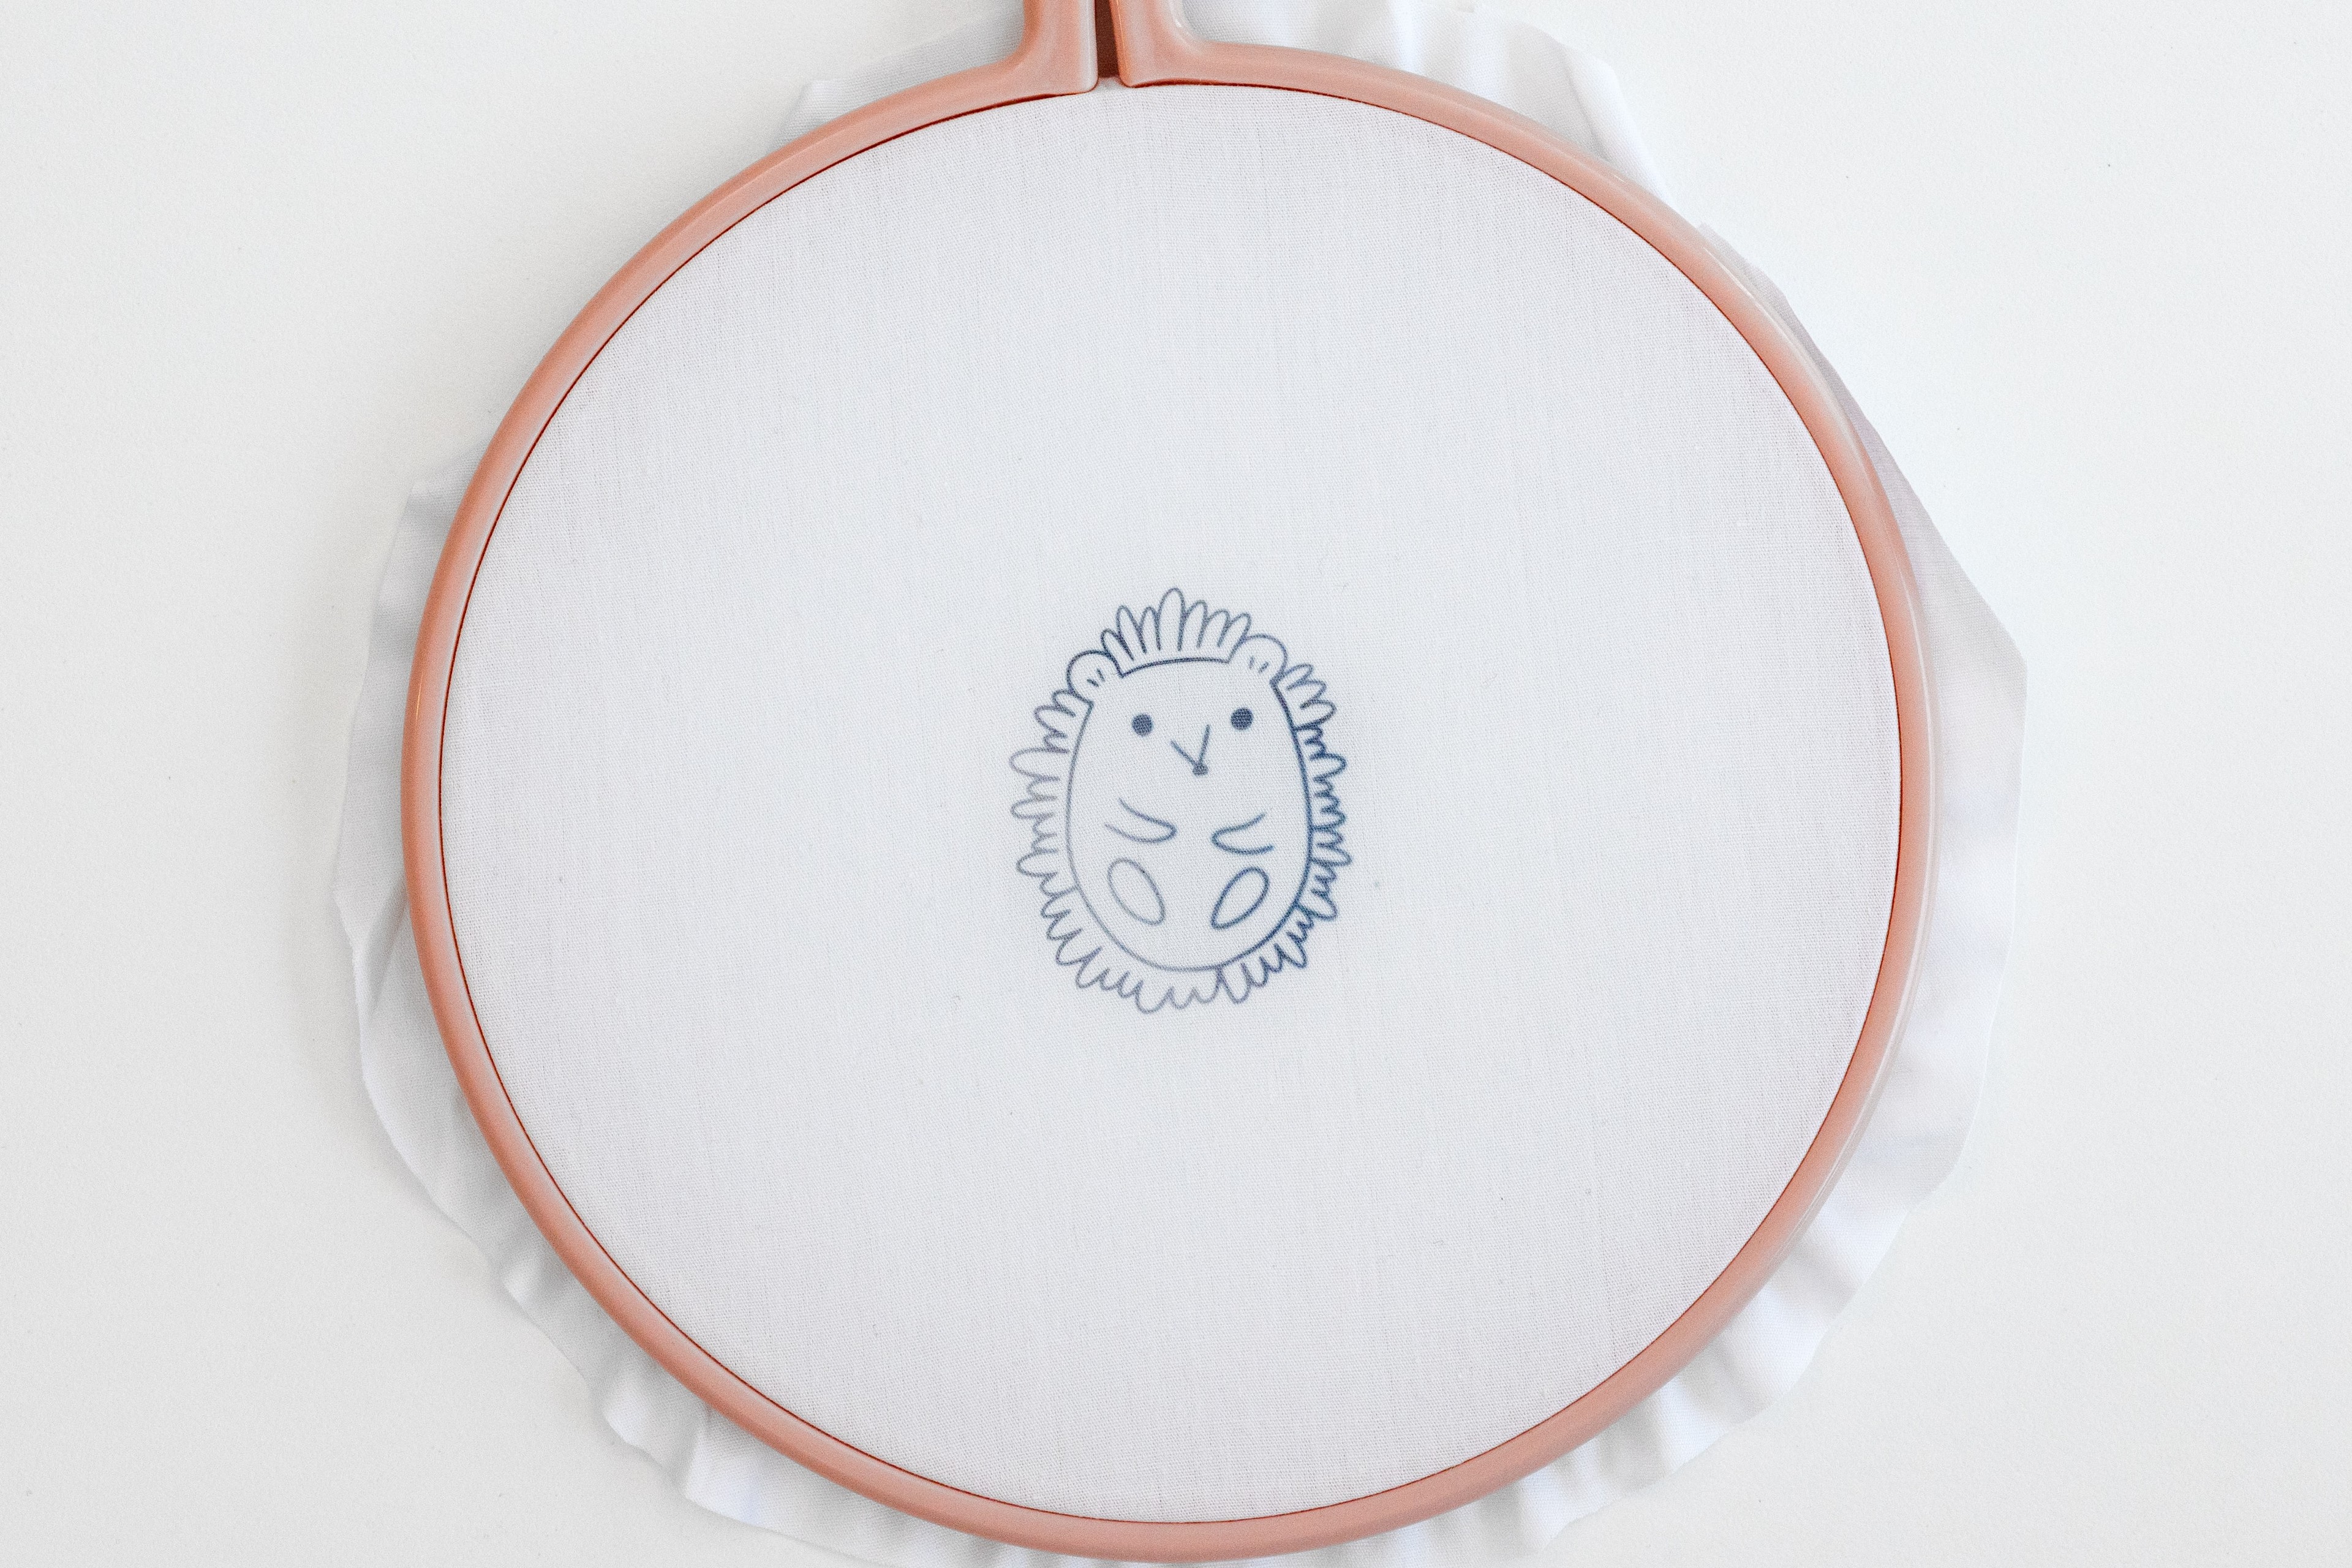 A hedgehog pattern has been transferred onto the hoop.